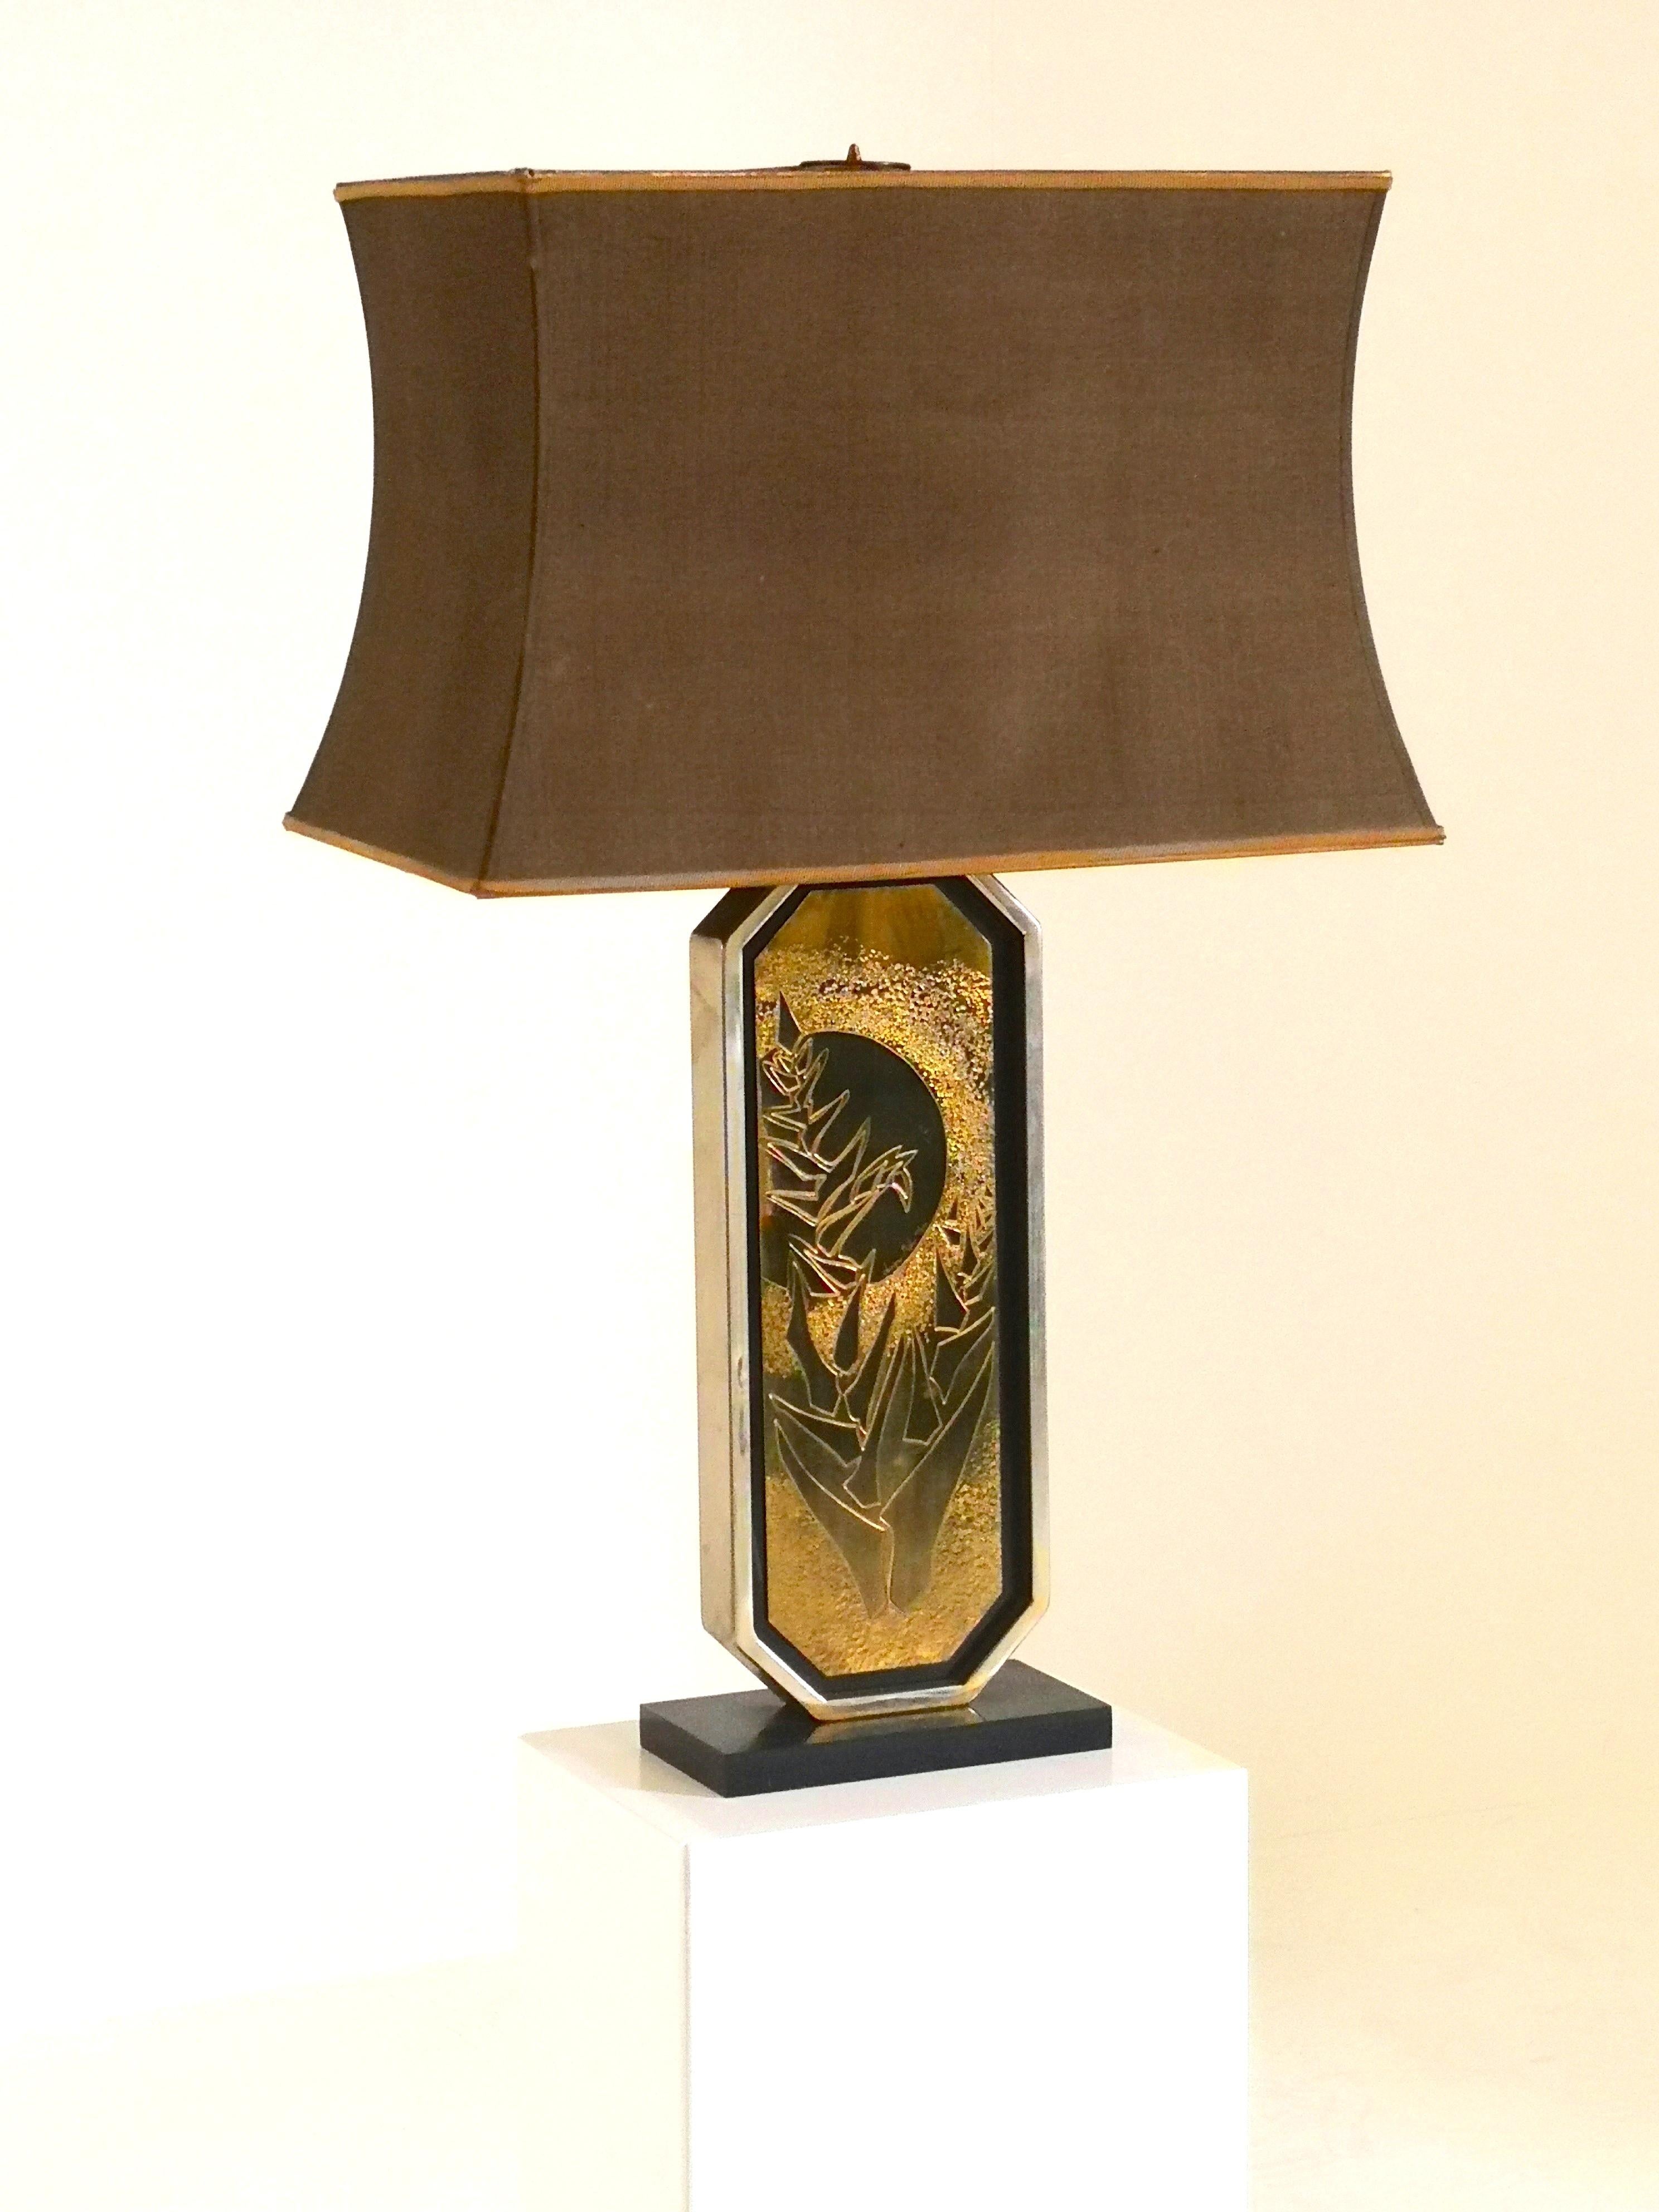 Mid-Century Modern George Mathias table lamp with original lamp shade, 1970s
It is a 23-karat gold-plated table lamp, engraved by hand and signed and numbered with edition no. 20 of 250.
The etched engraving is made on a 23-karat gold-plated plate